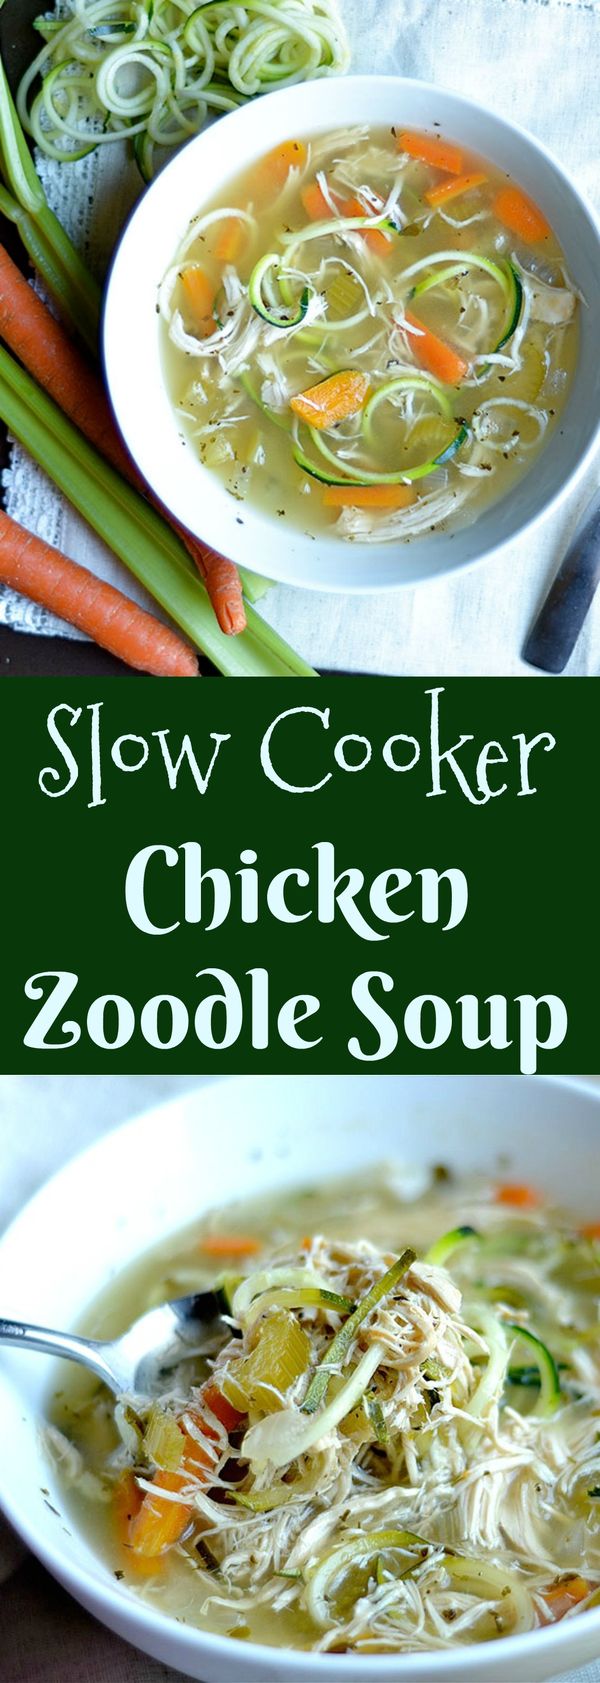 Slow Cooker Chicken Zoodle Soup